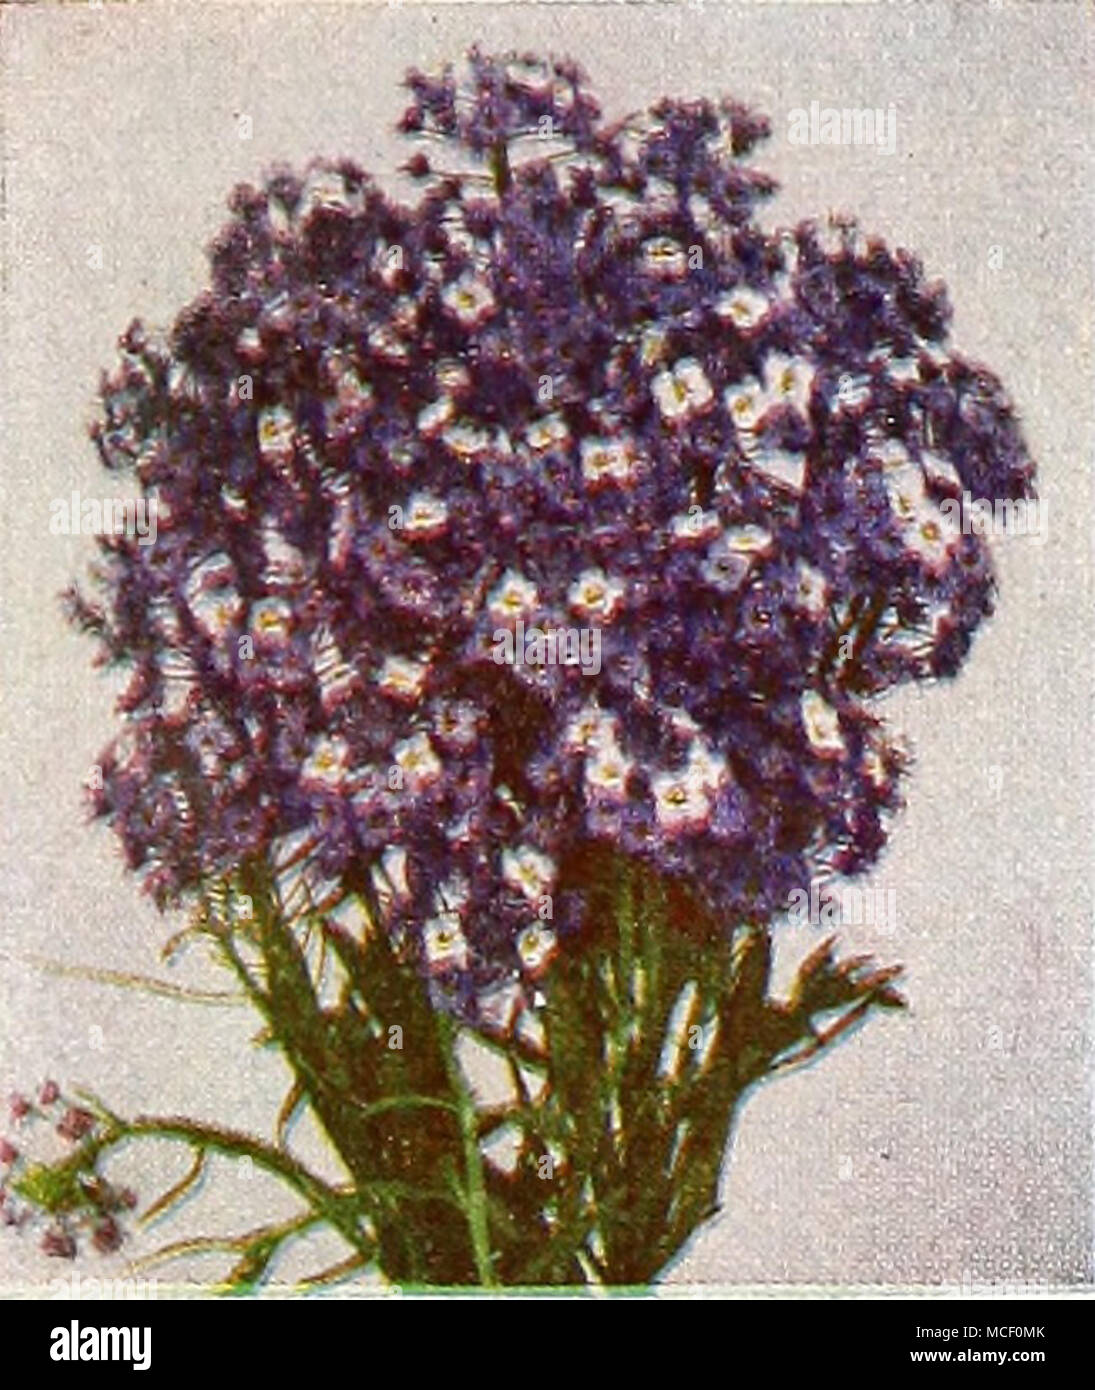 . 1078 Alyssum, Violet Queen ® A most delightful dwarf annual Sweet Alyssum forming compact plants 5 inches tall covered from early summer until frost with bright violet- blue flowers which hold their color through all kinds of weather. A splen- did edging plant of eas&gt;' culture and dependable performance. Pkt. 15c; large pkt. 50c; li oz. 75c; oz. $2.25. Stock Photo